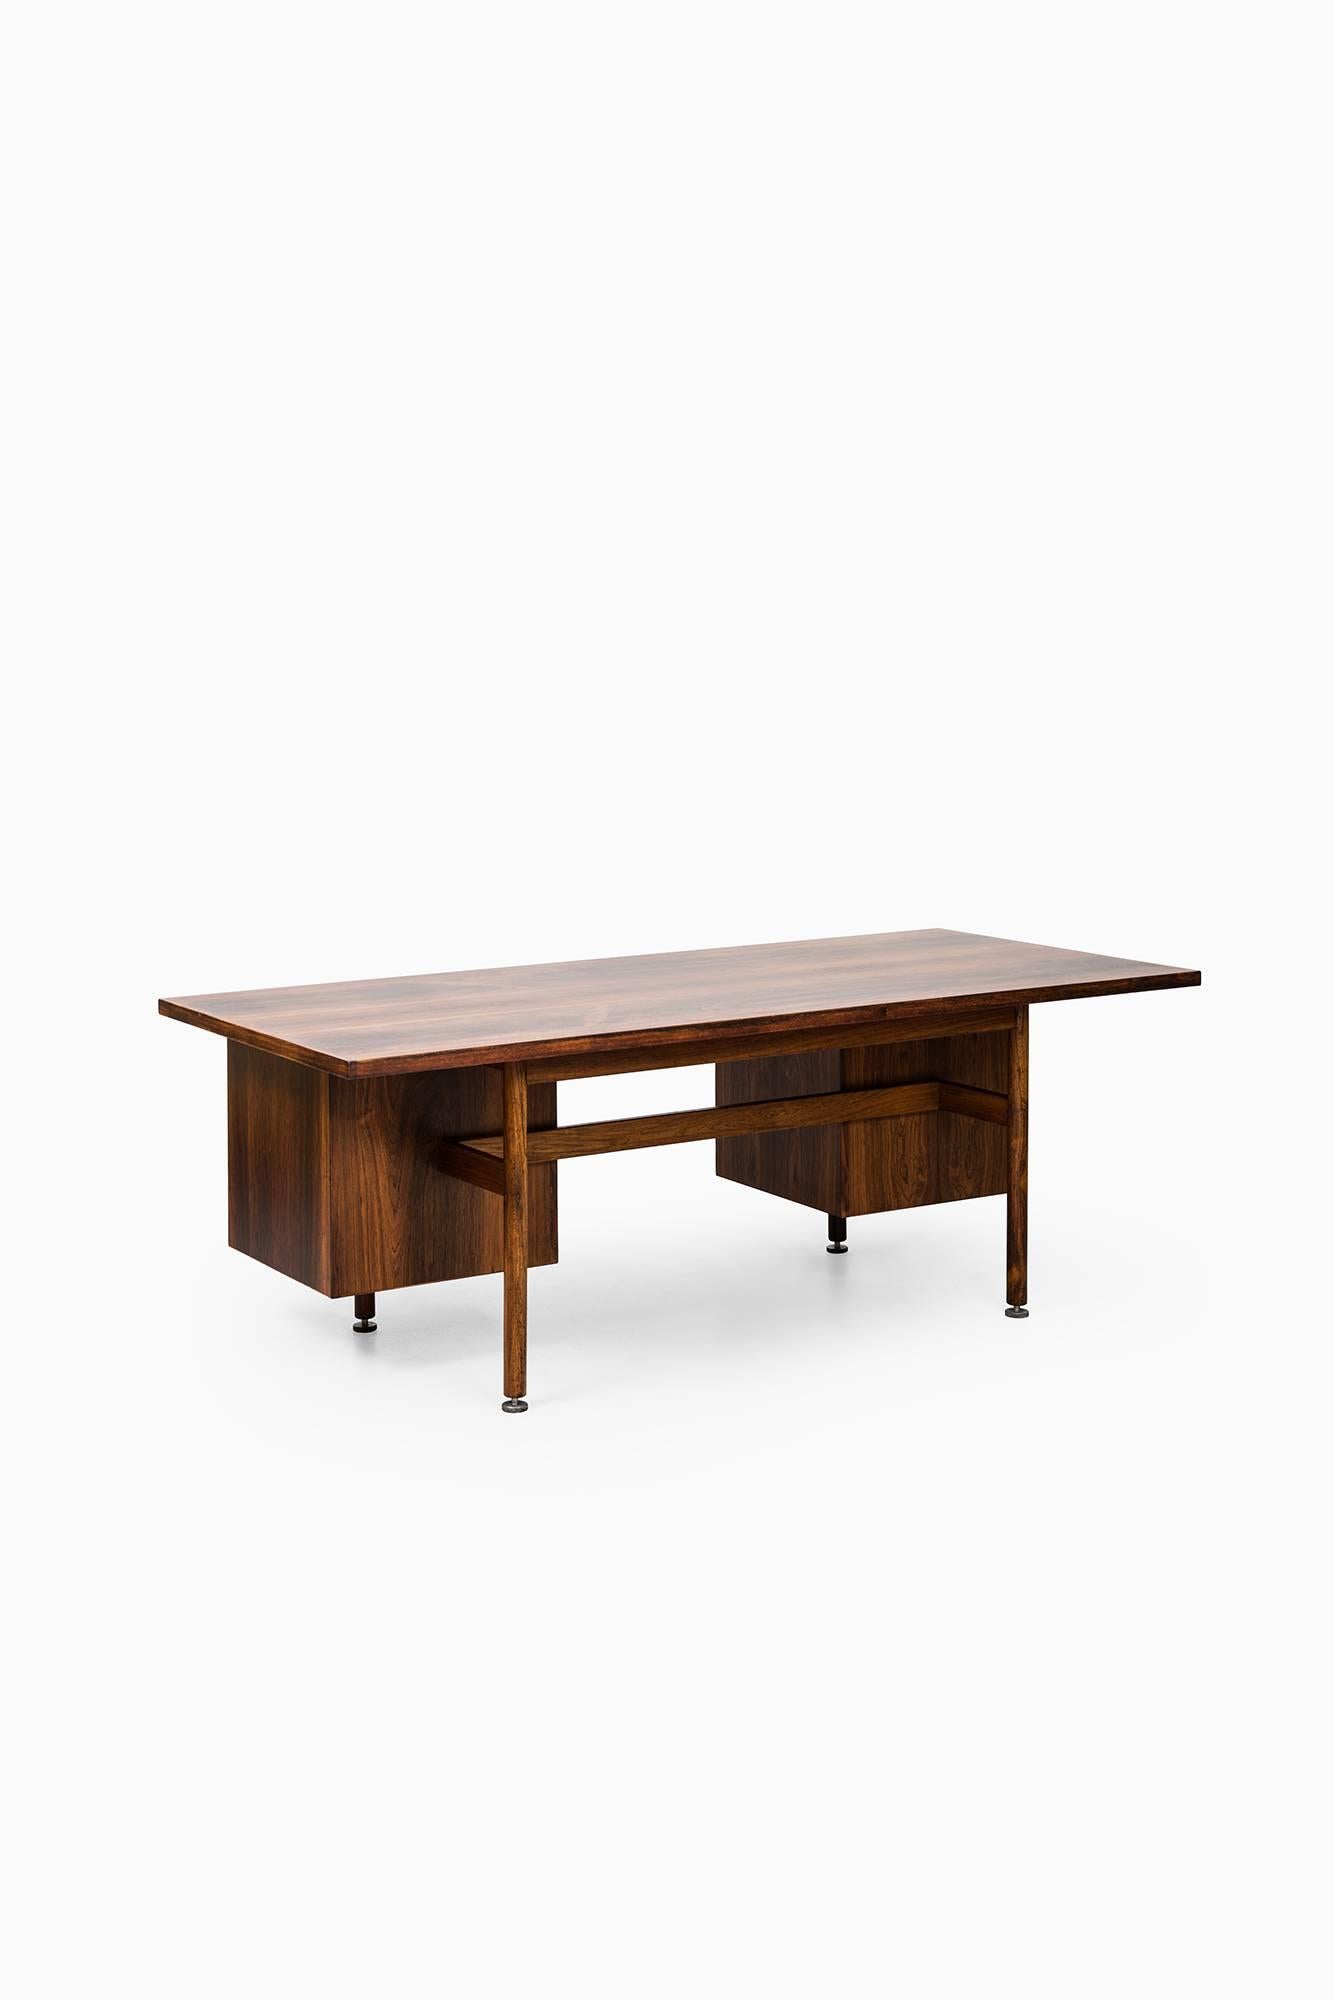 Mid-20th Century Jens Risom Large Executive Desk by Gutenberghus in Denmark